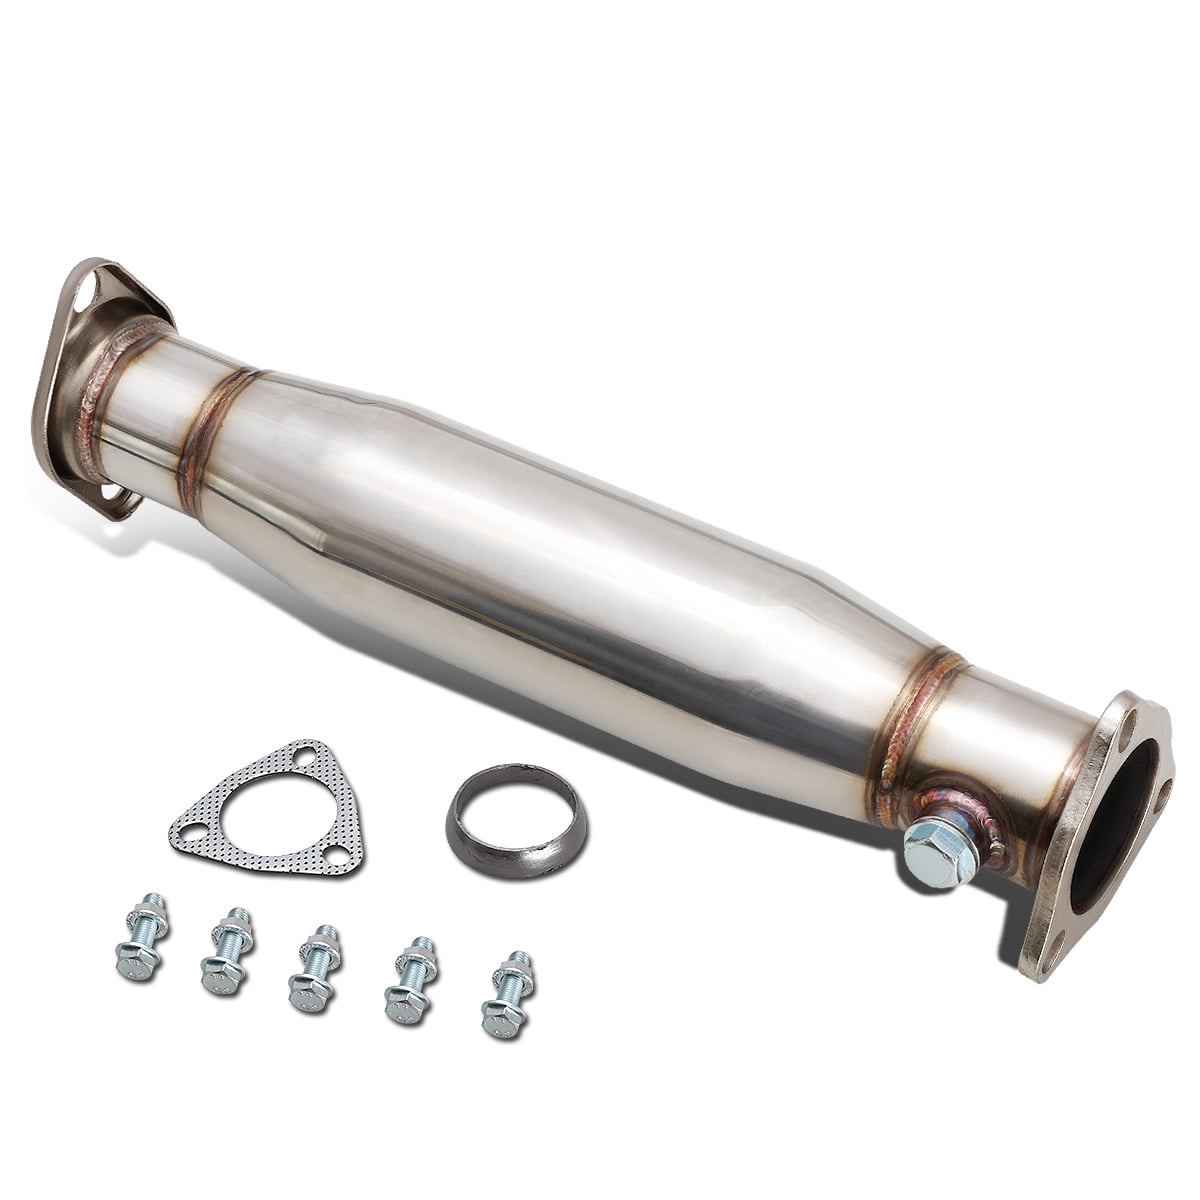 DNA MOTORING HFC-HC01EX HFCHC01EX Stainless Steel Exhaust Performance Pipe 